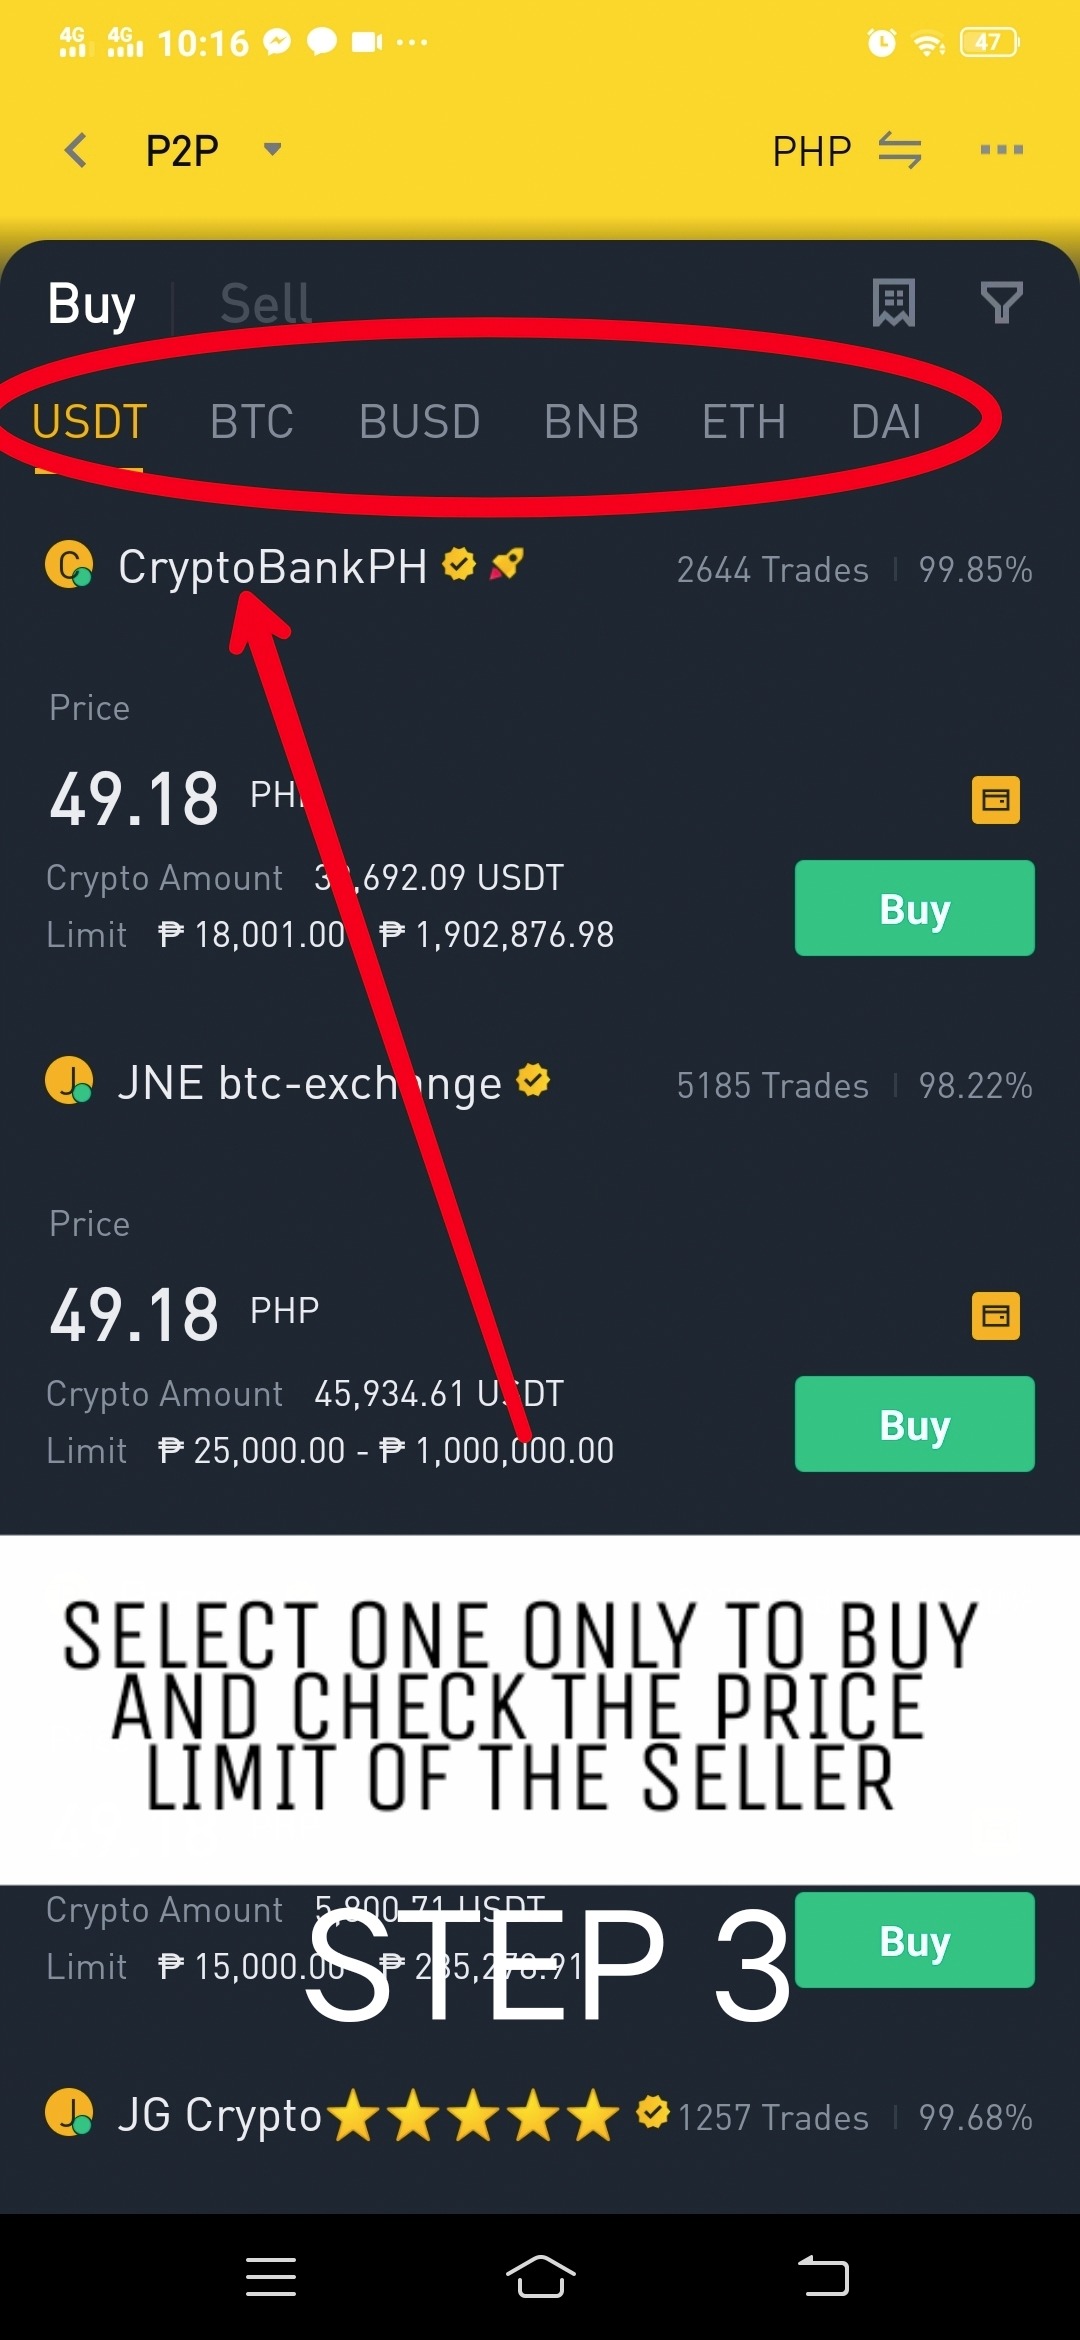 How to buy LTC via Binance and sell it trough Tirlu ...